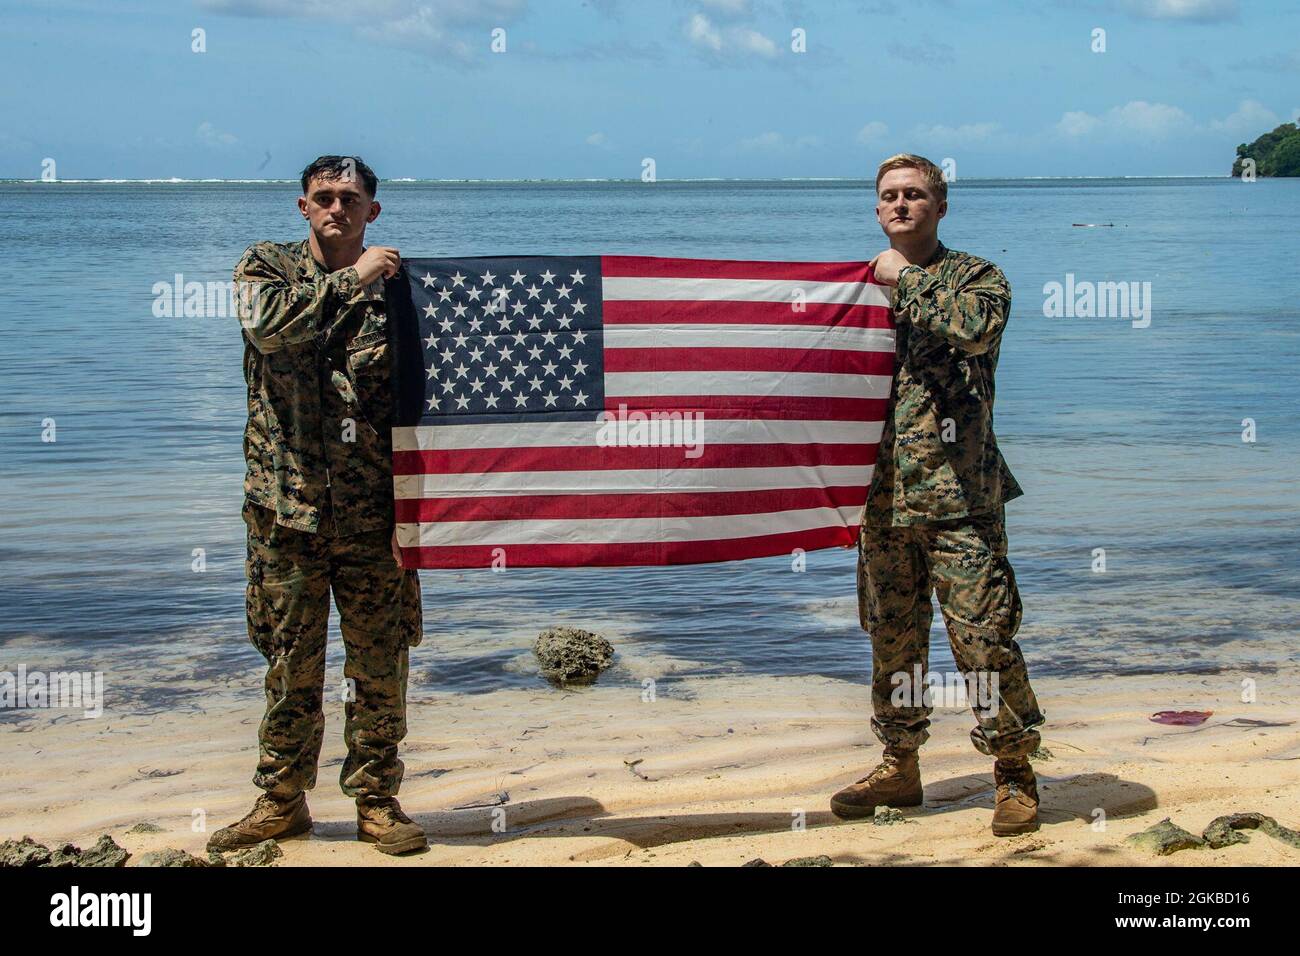 U.S. Marines with the 31st Marine Expeditionary Unit (MEU) hold a United States flag at White Beach, the location that the 1st Marine Division landed at during World War II, on the Island of Peleliu in the Republic of Palau, March 3, 2021. The 31st MEU is operating aboard ships of the Amphibious Squadron 11 in the 7th fleet area of operations to enhance interoperability with allies and partners and serve as a ready response force to defend peace and stability in the Indo-Pacific region. Stock Photo